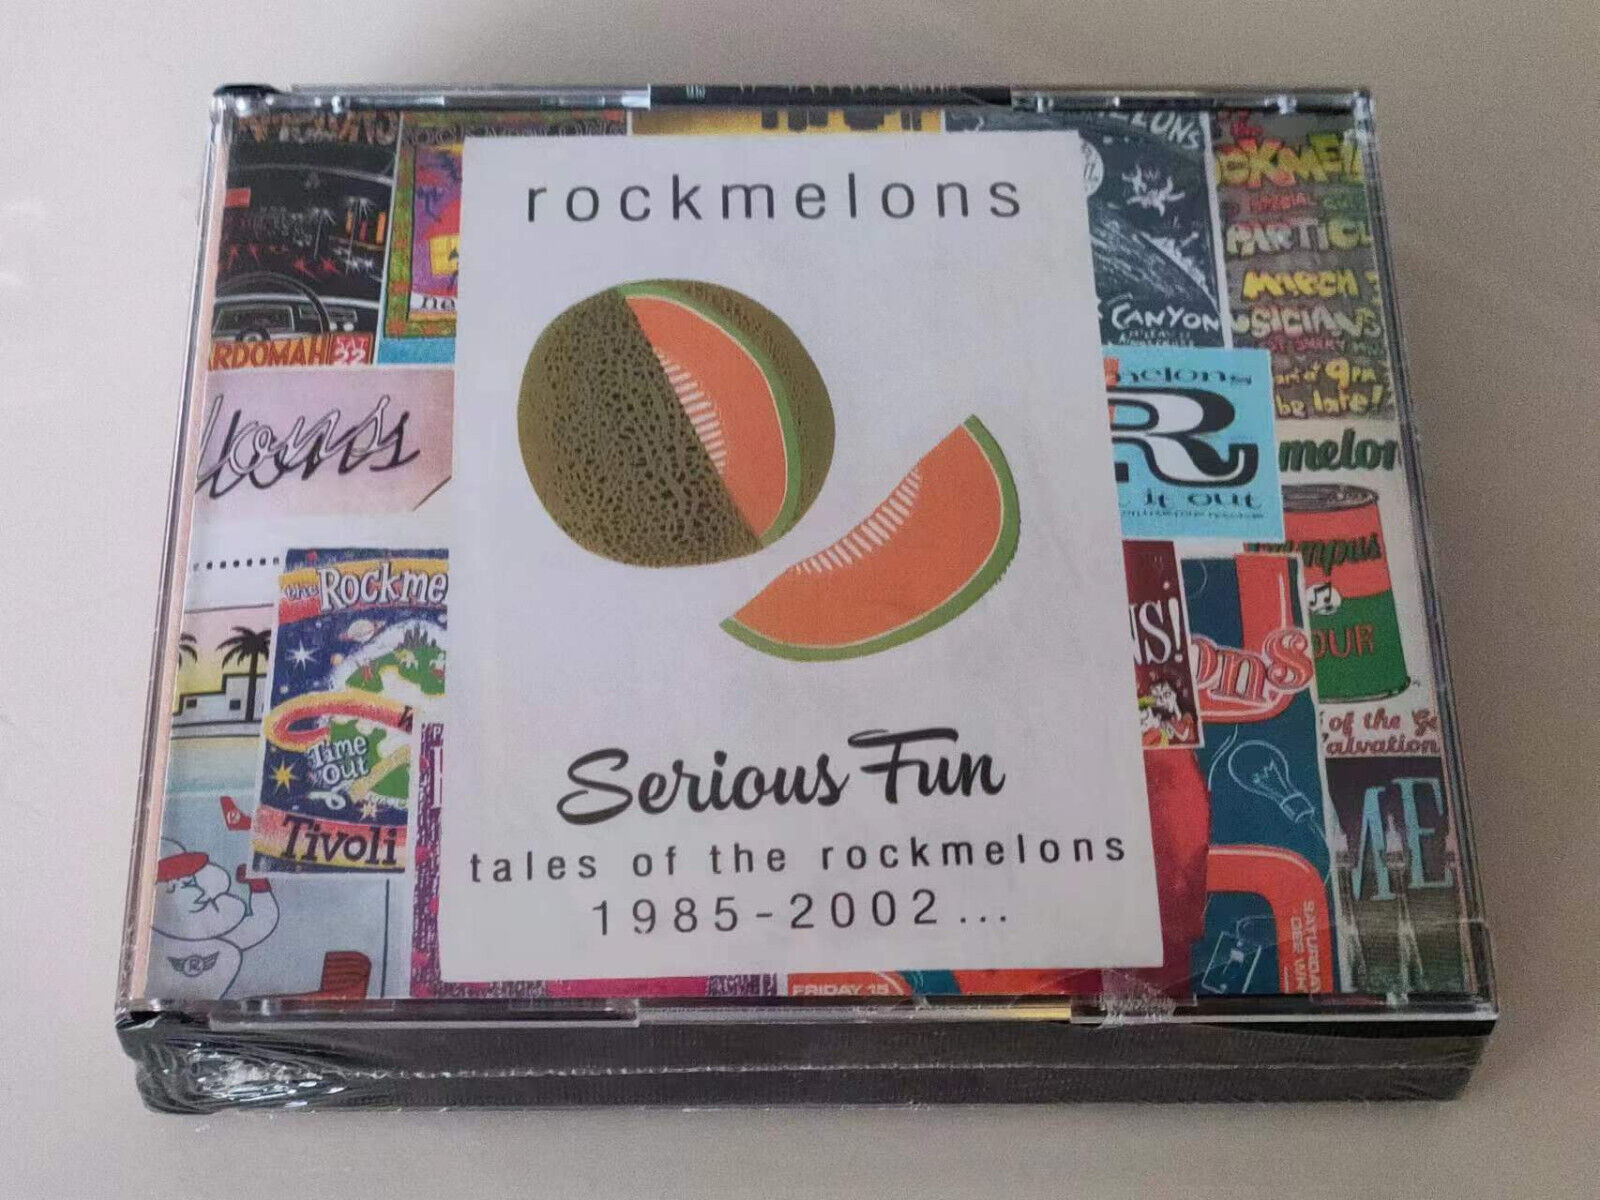 Serious Fun: Tales of the Rockmelons 1985-2002 by Rockmelons (4CD, 2015) AU